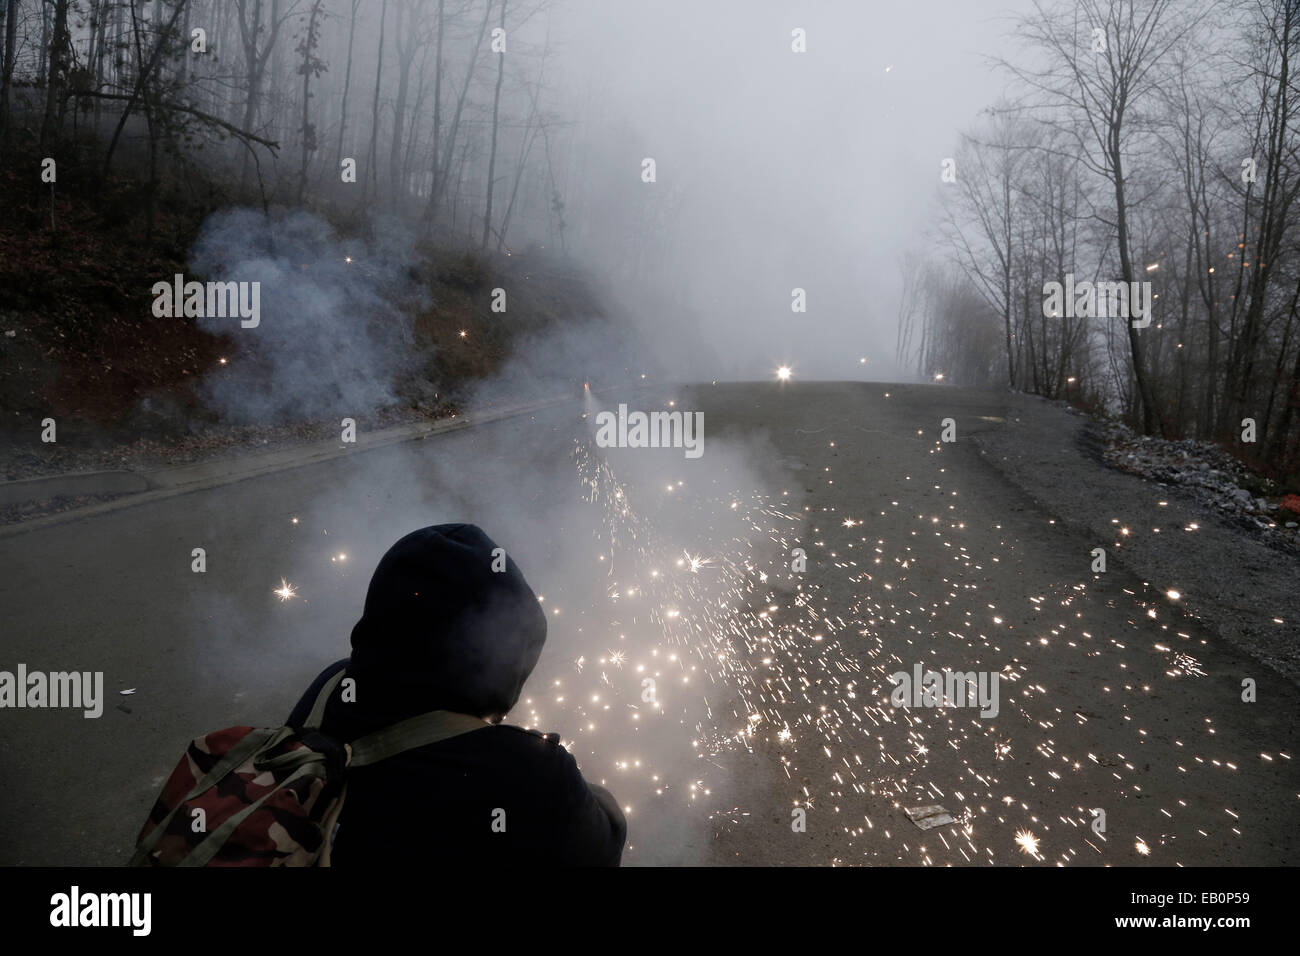 Skouries, Chalkidiki peninsula, Greece. 23rd November, 2014. Clashes between demonstrators and police during protest rally against gold mining in Skouries area on Mount Kakkavos in Chalkidiki peninsula, northern Greece on November 23, 2014. Credit:  Konstantinos Tsakalidis/Alamy Live News Stock Photo